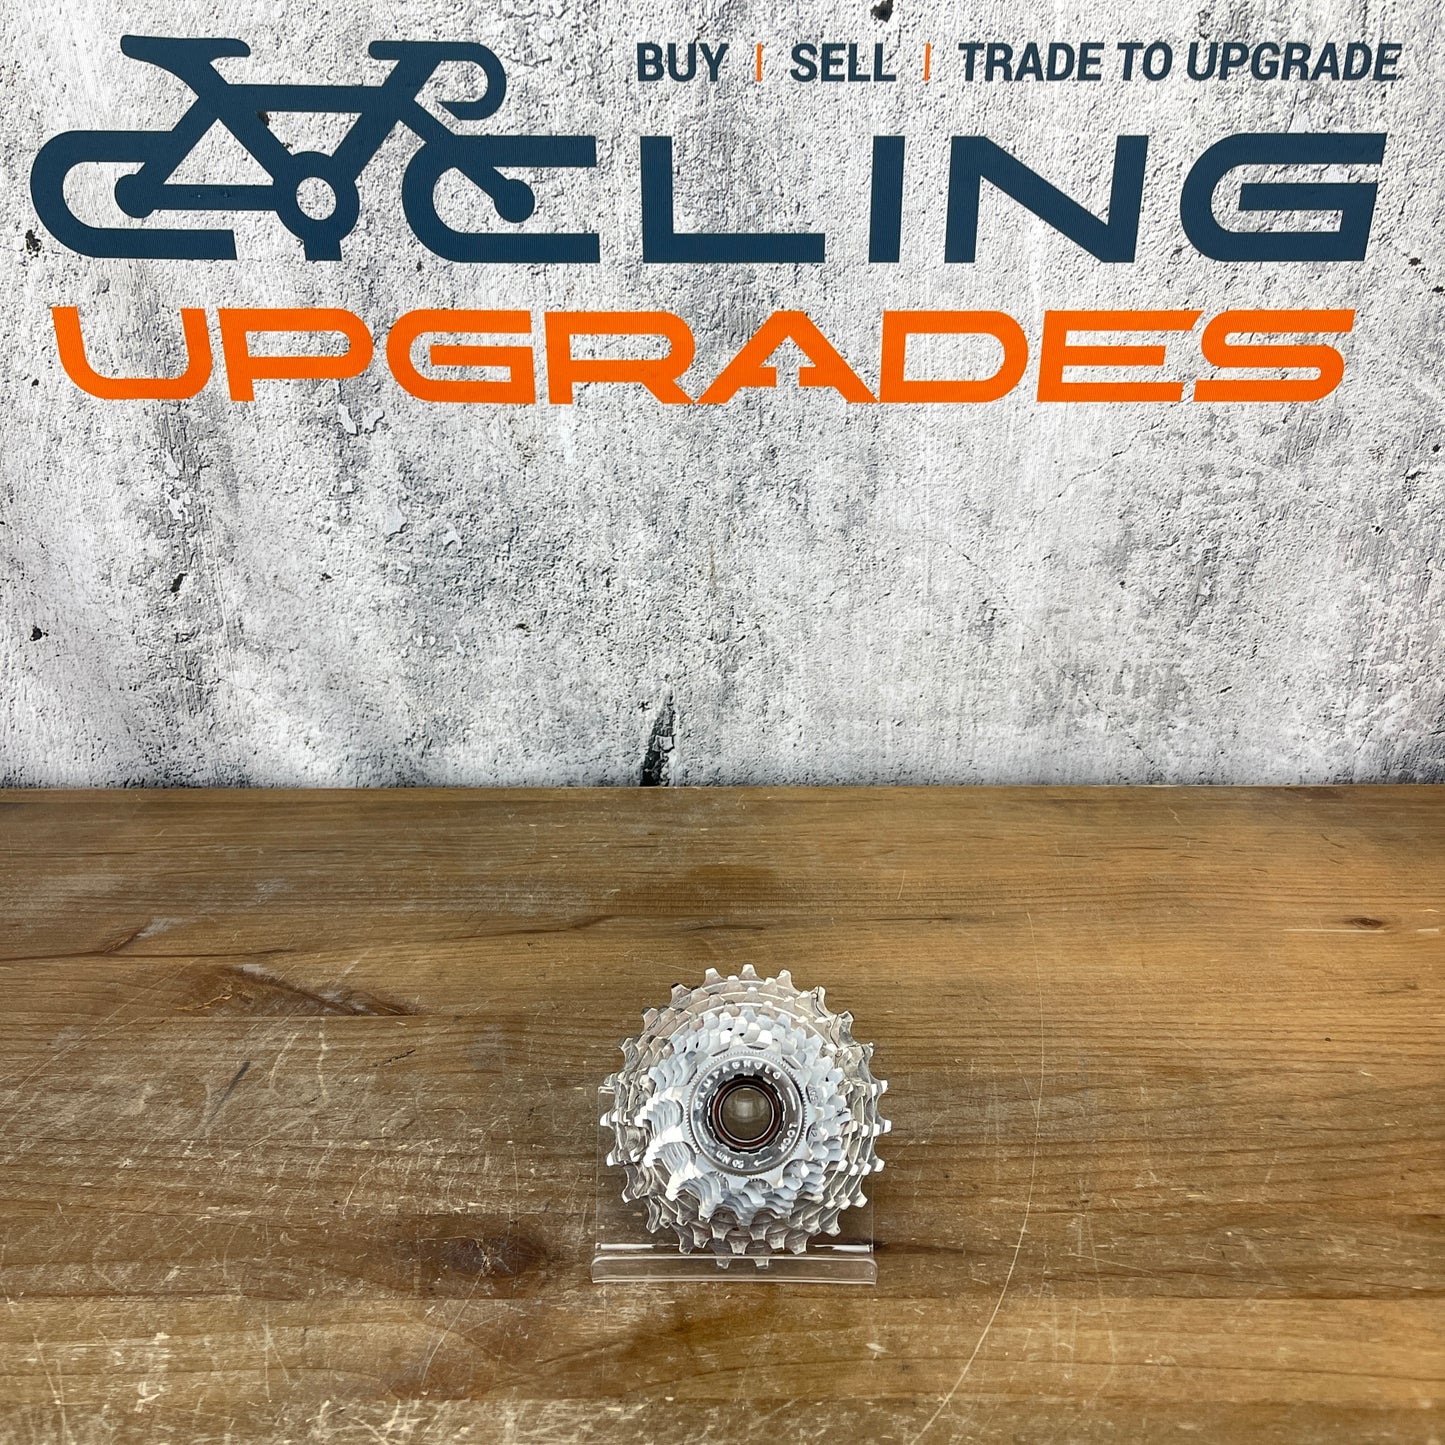 Campagnolo Record 11-23t 10-Speed Road Bike Cassette "Typical Wear"